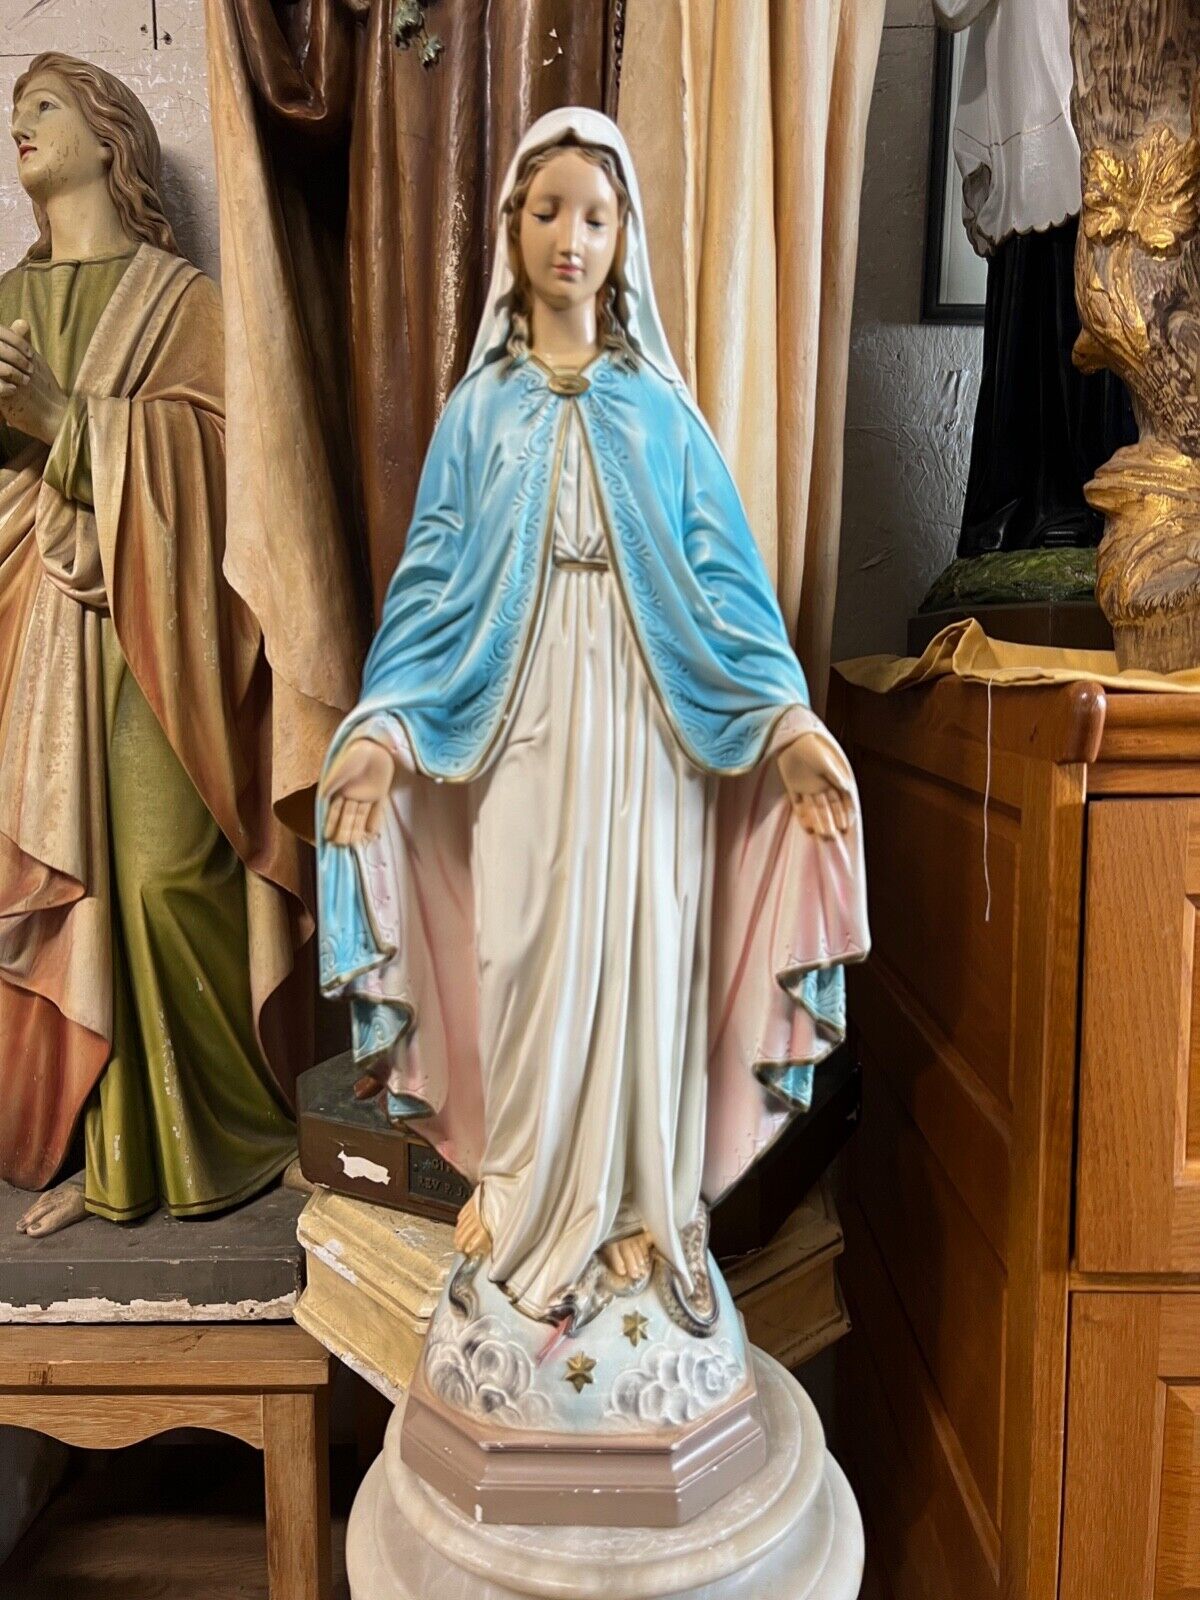 Our Lady of Grace Blessed Virgin Mary Statue